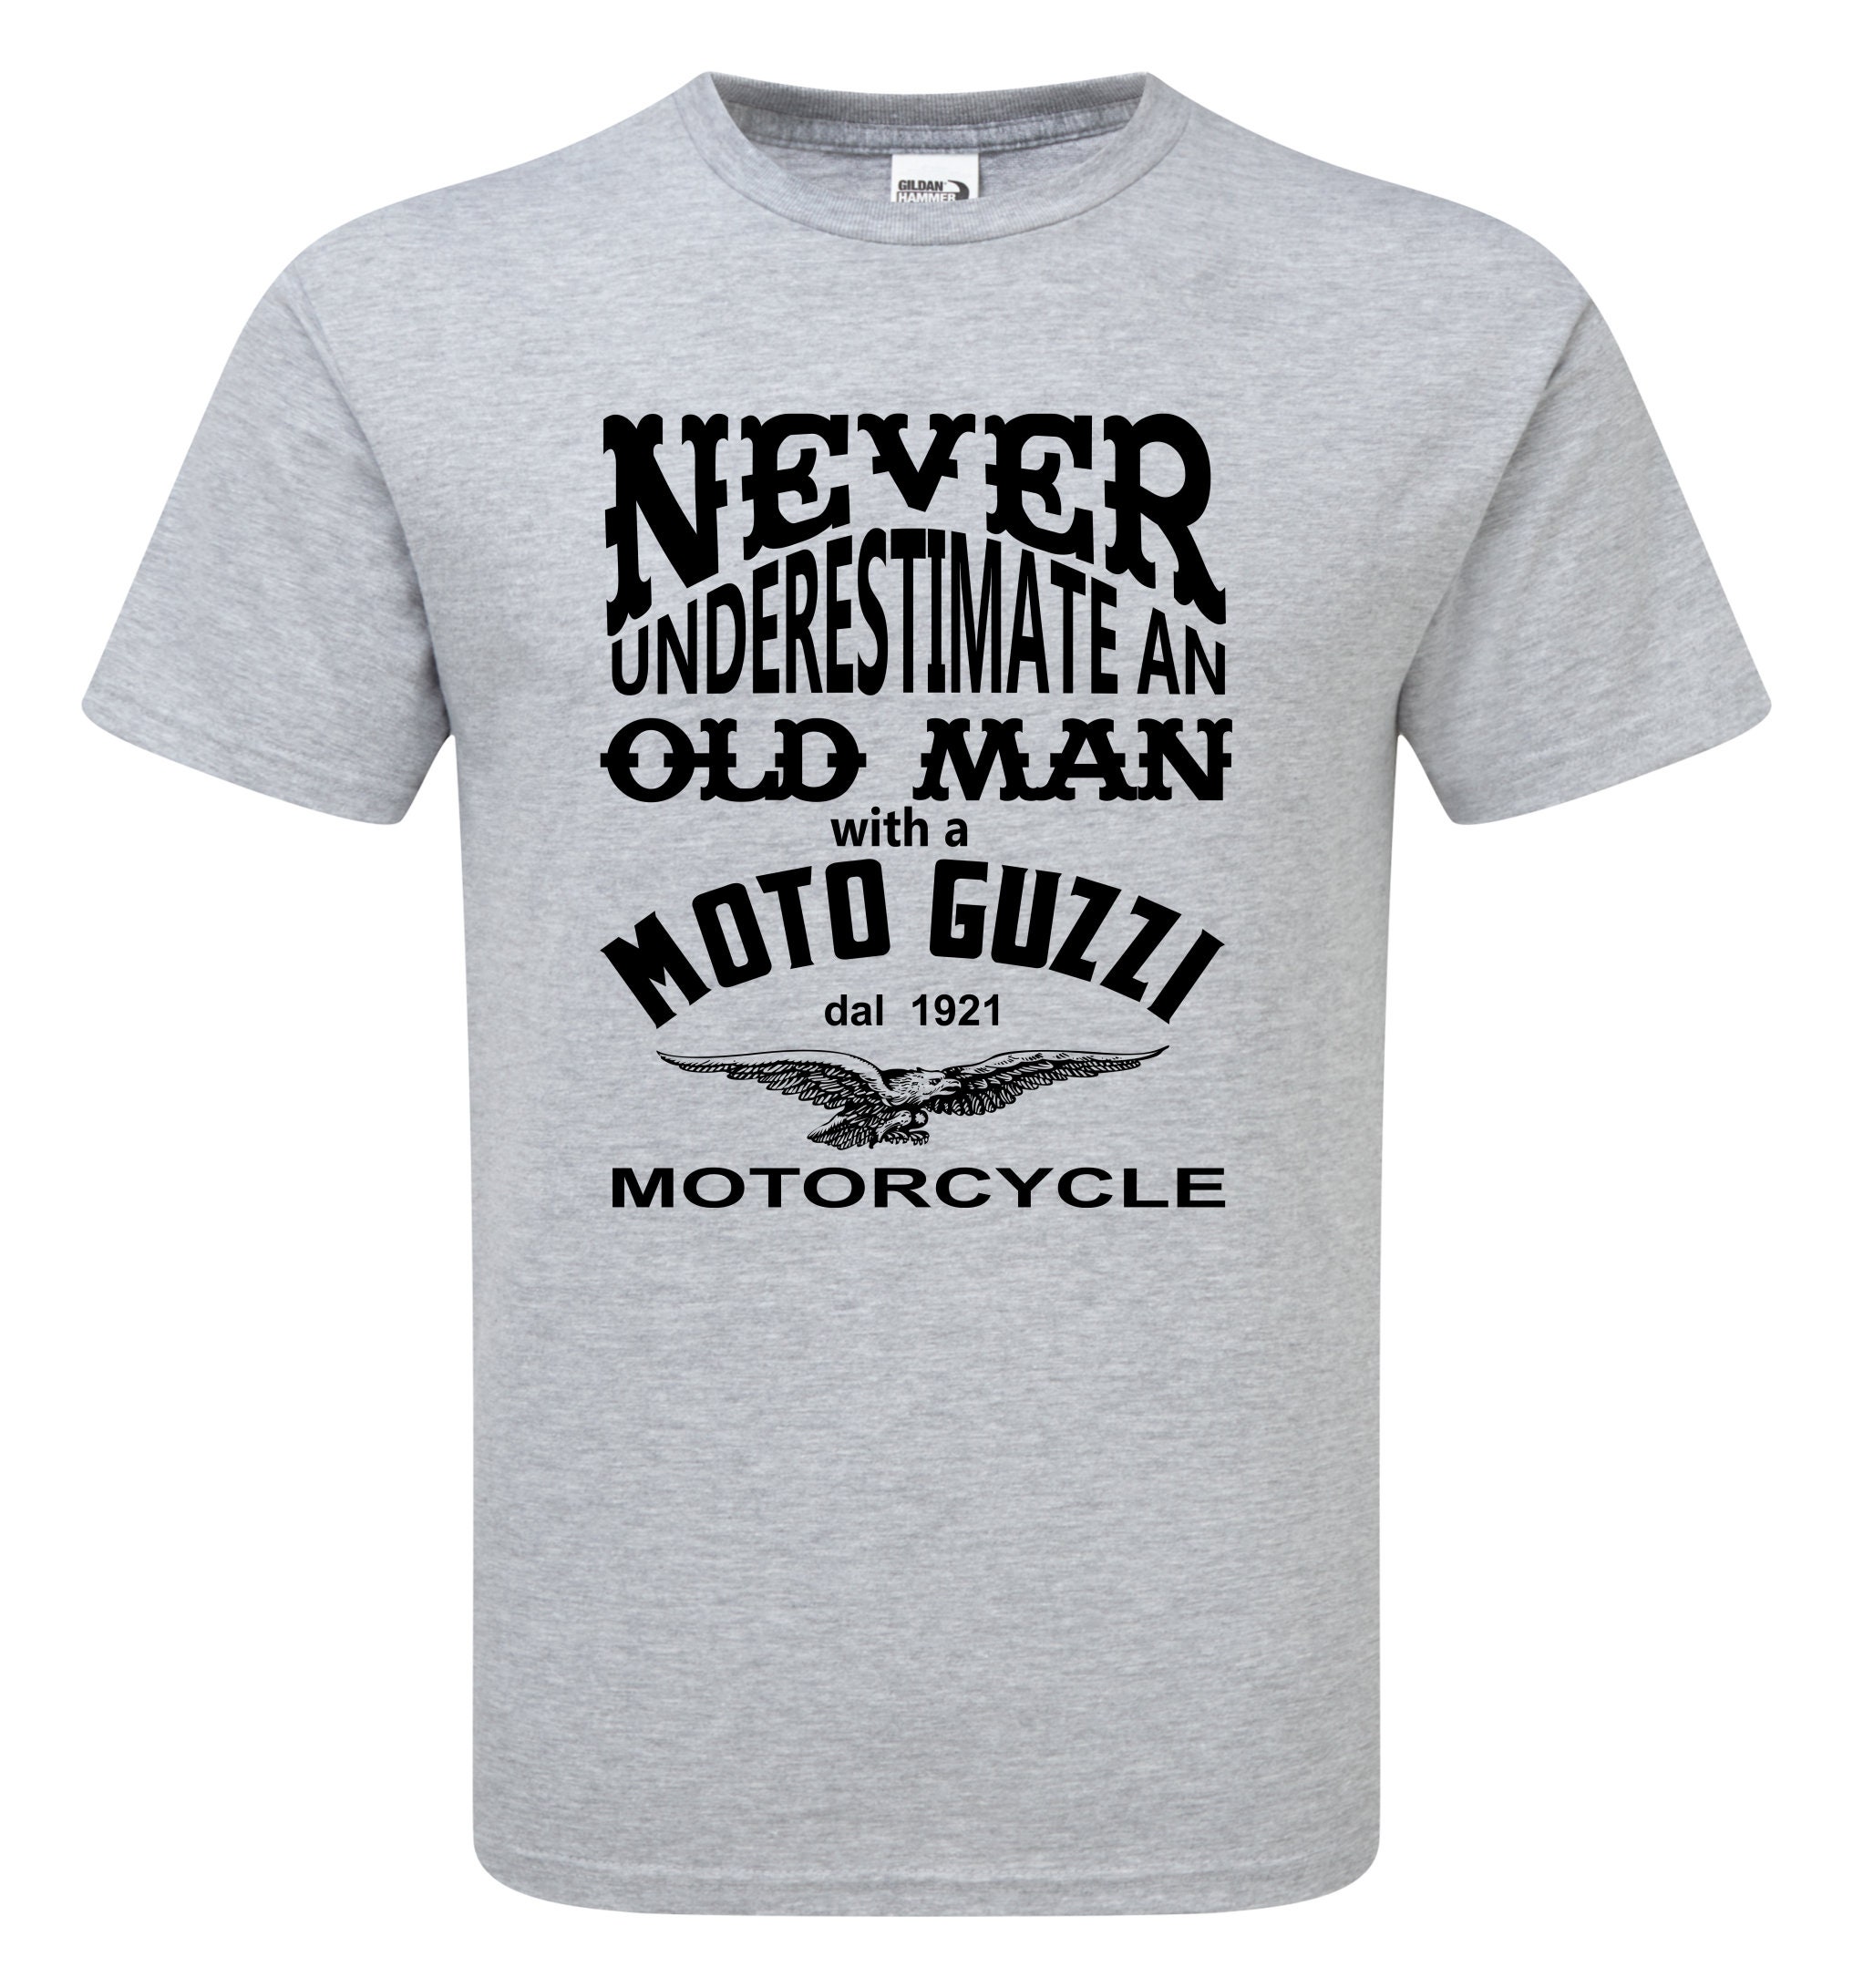 Funny Hammer Premium T-shirt Never Underestimate an Old Man on a Moto Guzzi  Motorcycle 